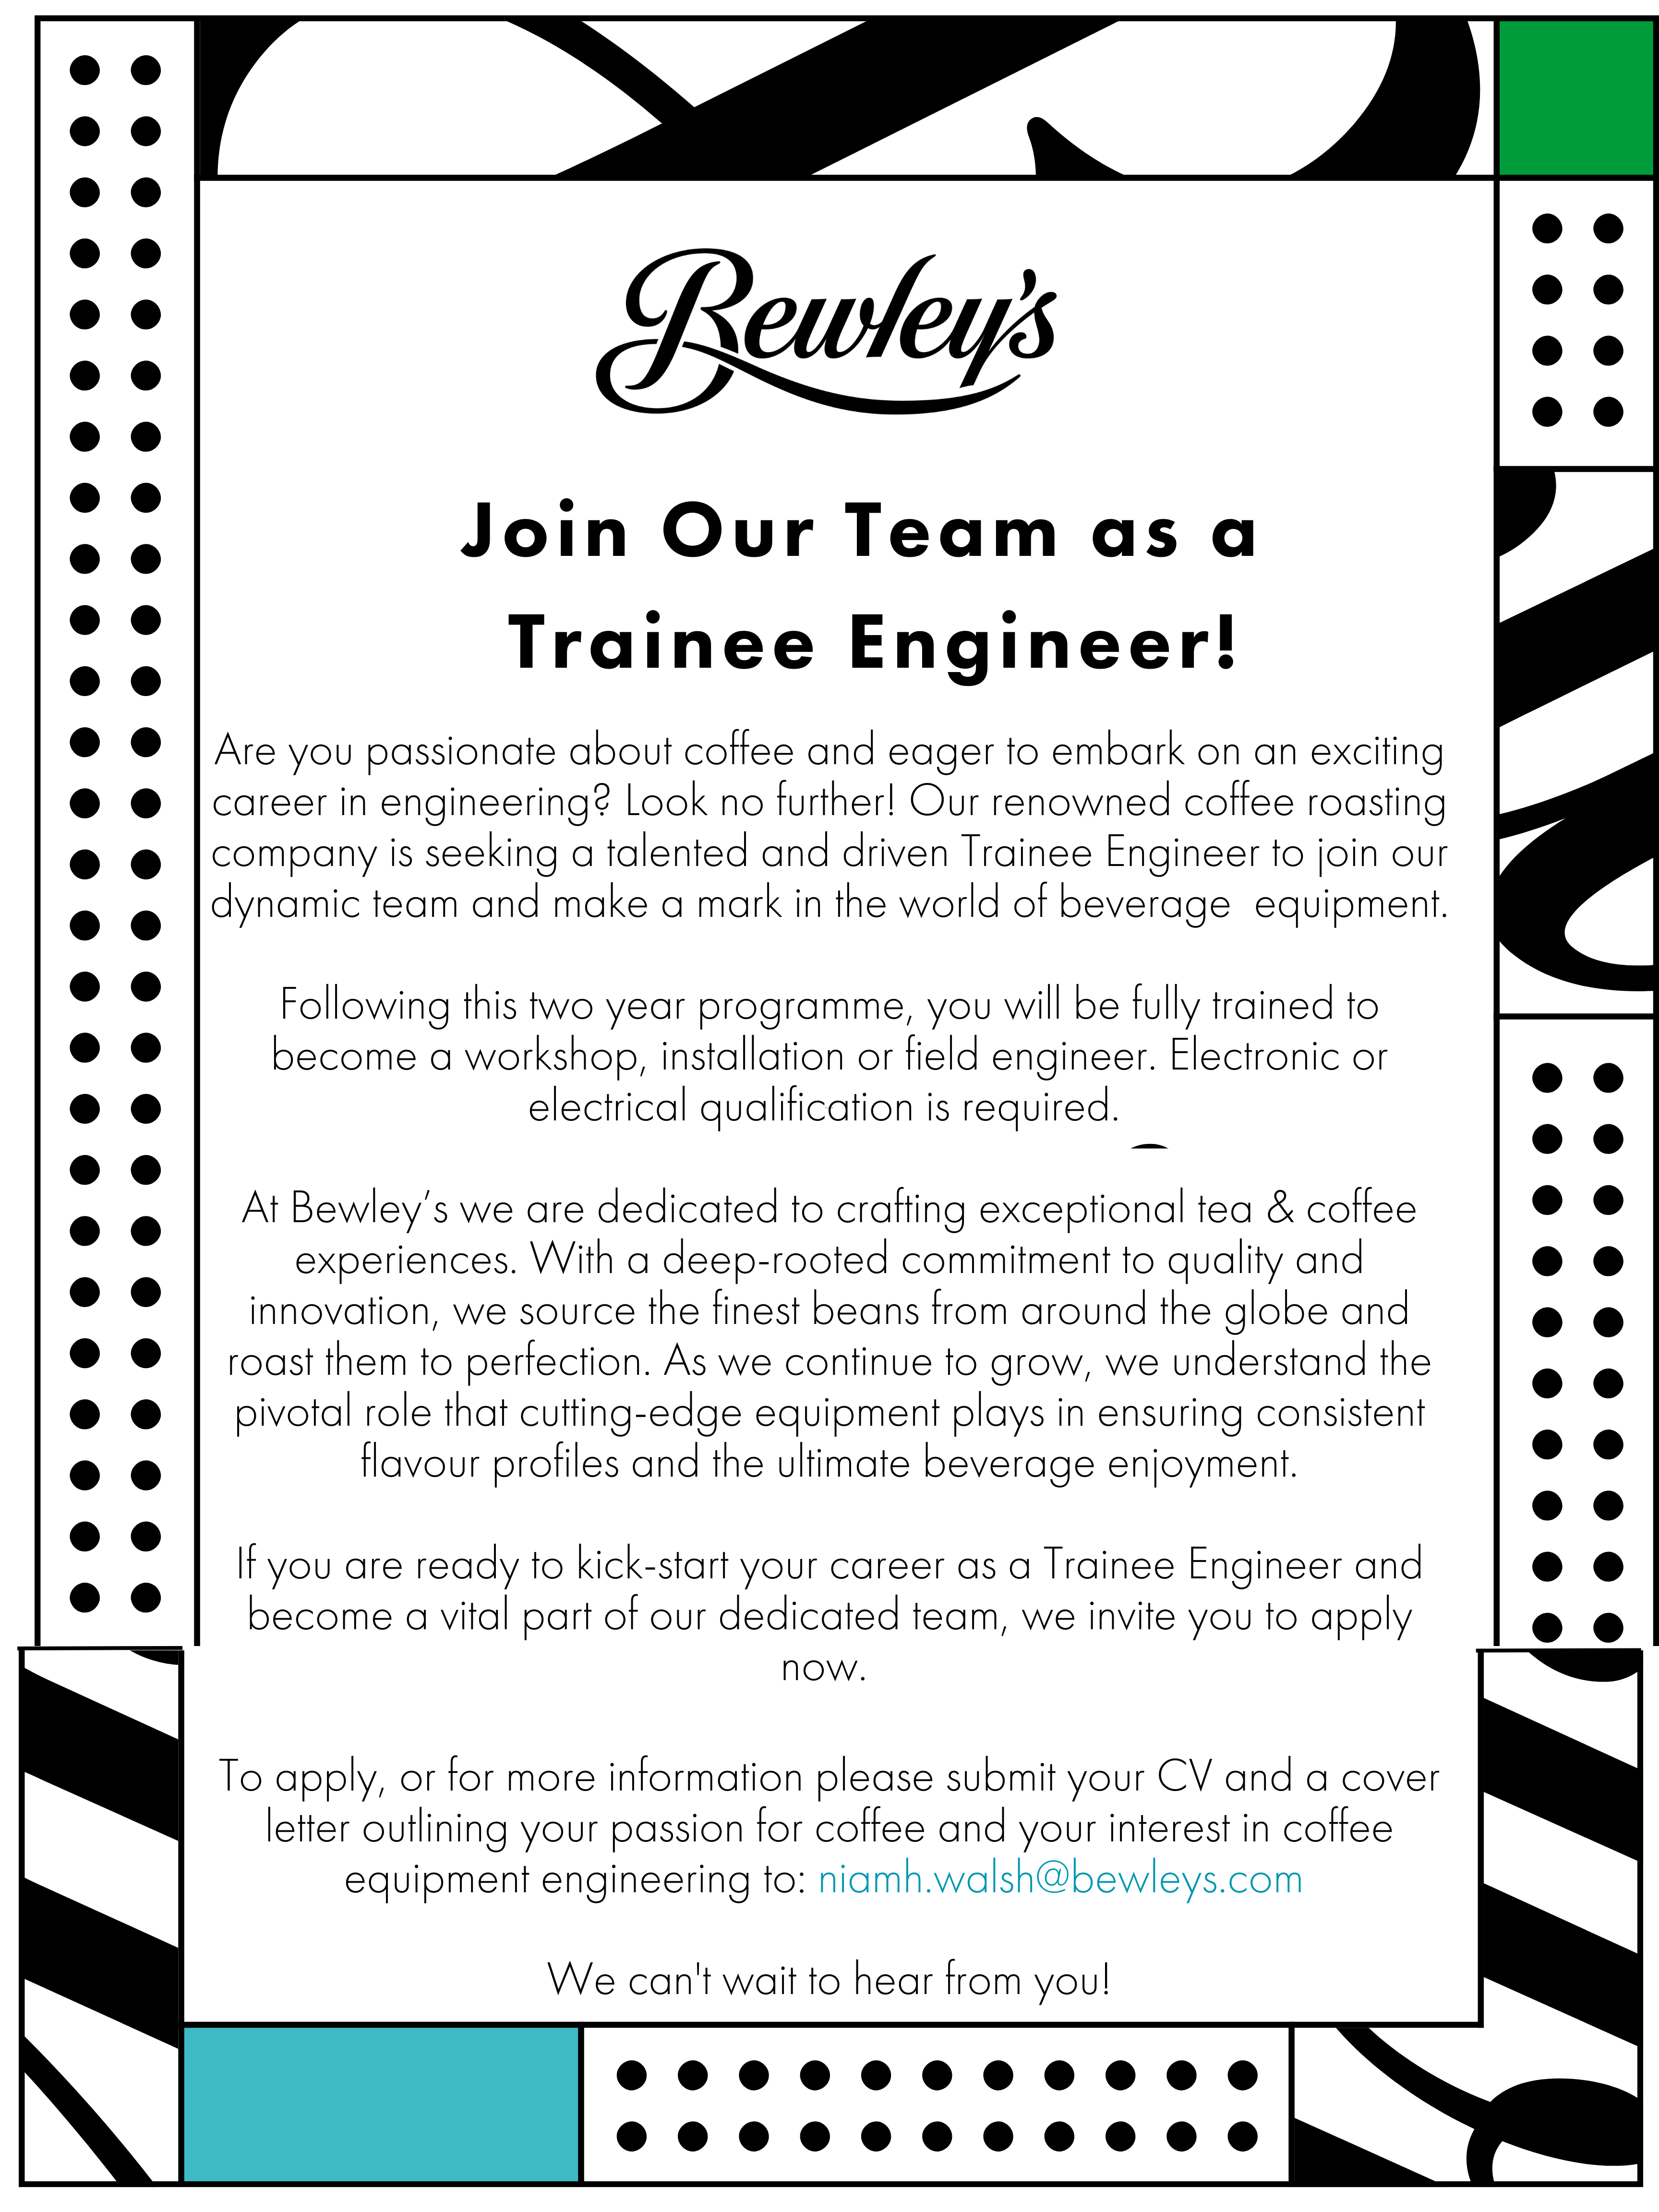 Bewley's are recruiting Trainee Engineers